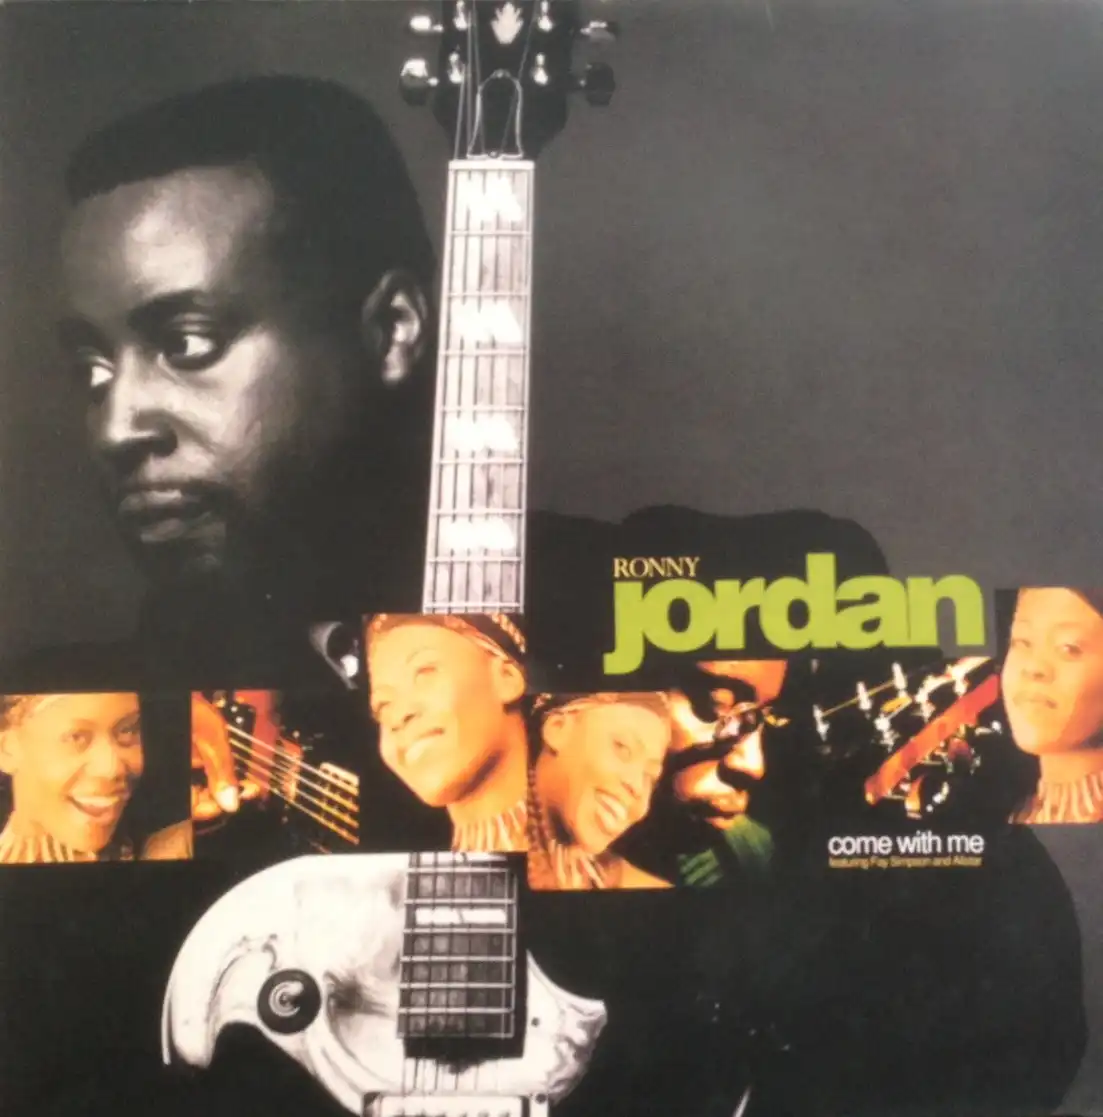 RONNY JORDAN / COME WITH ME